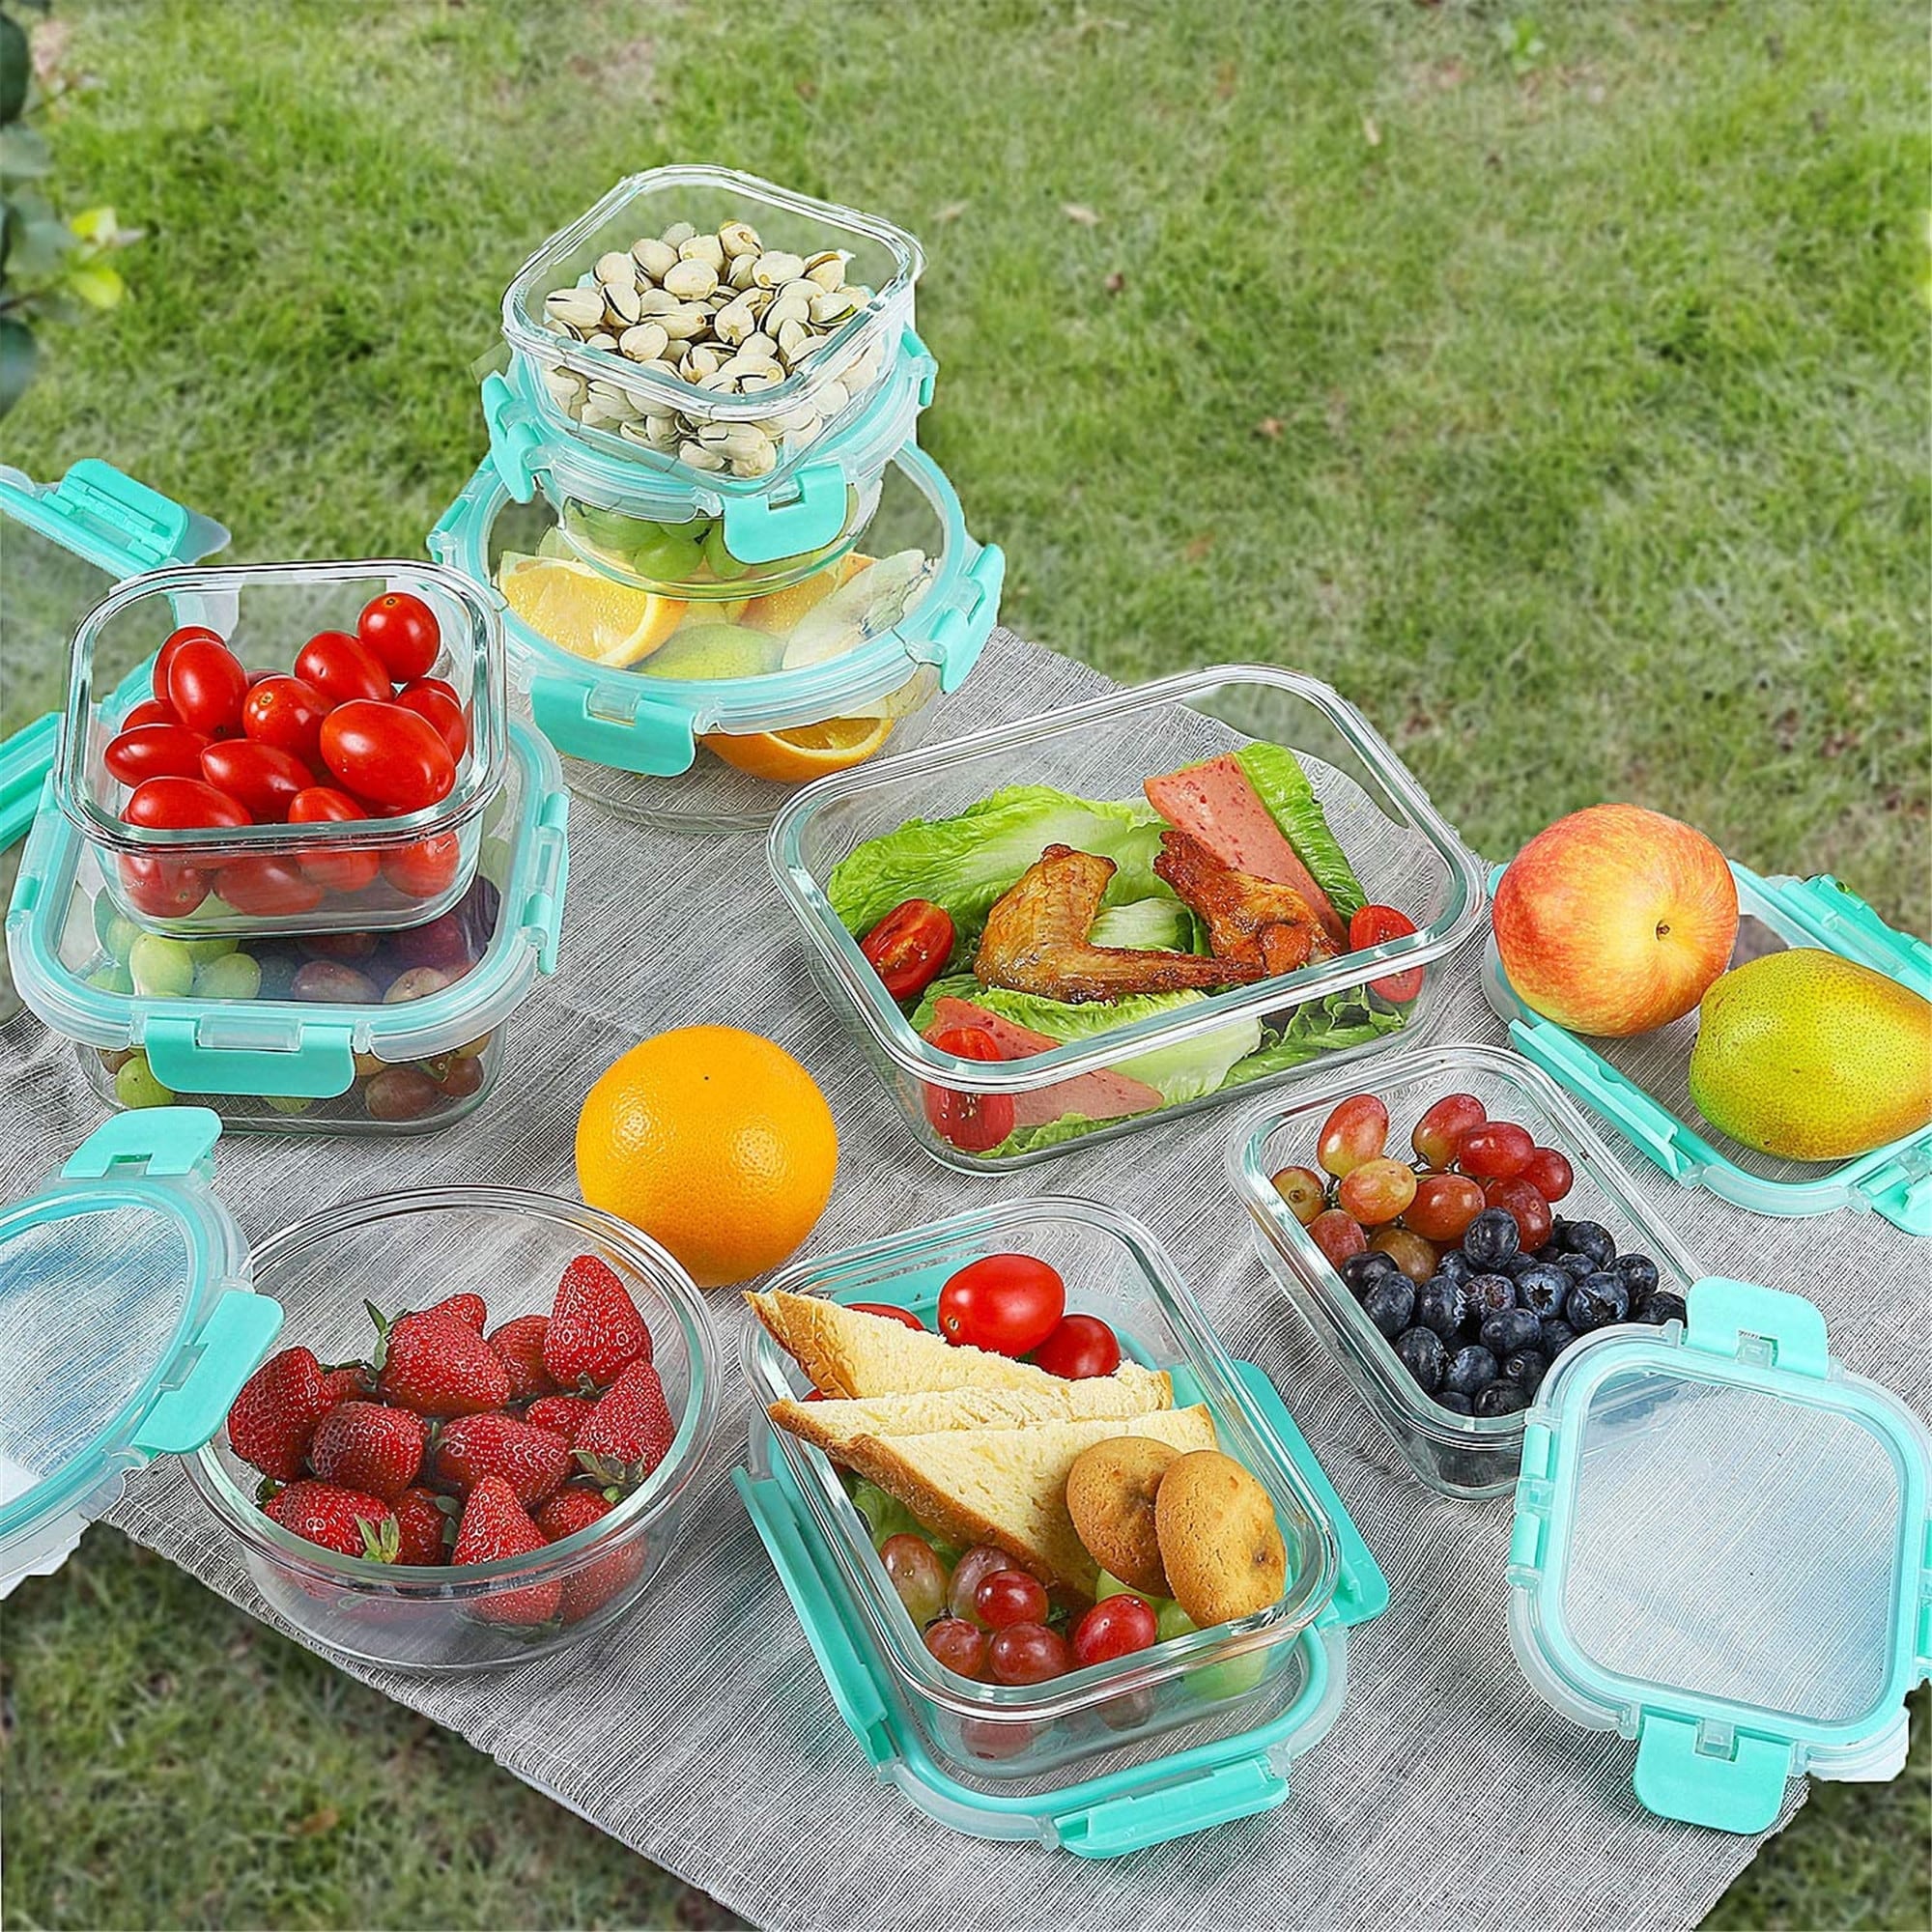 Bayco 10 Pack Glass Meal Prep Containers 2 Compartment, Glass Food Storage  Containers with Lids, Airtight Glass Lunch Bento Boxes, BPA-Free & Leak